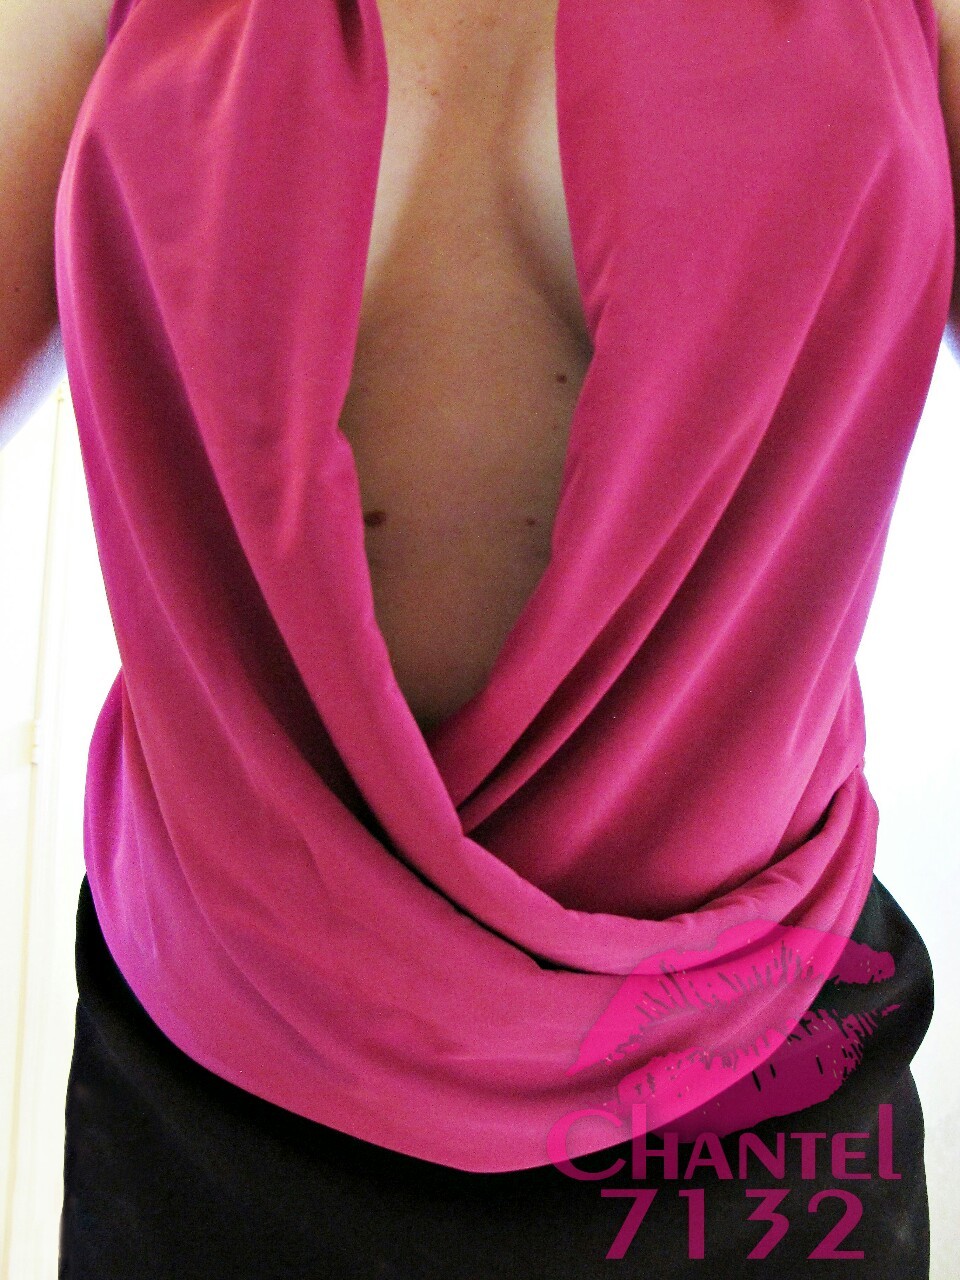 chantel7132-original:My fav outfit.   Love this hot pink low cut blouse and hot pink